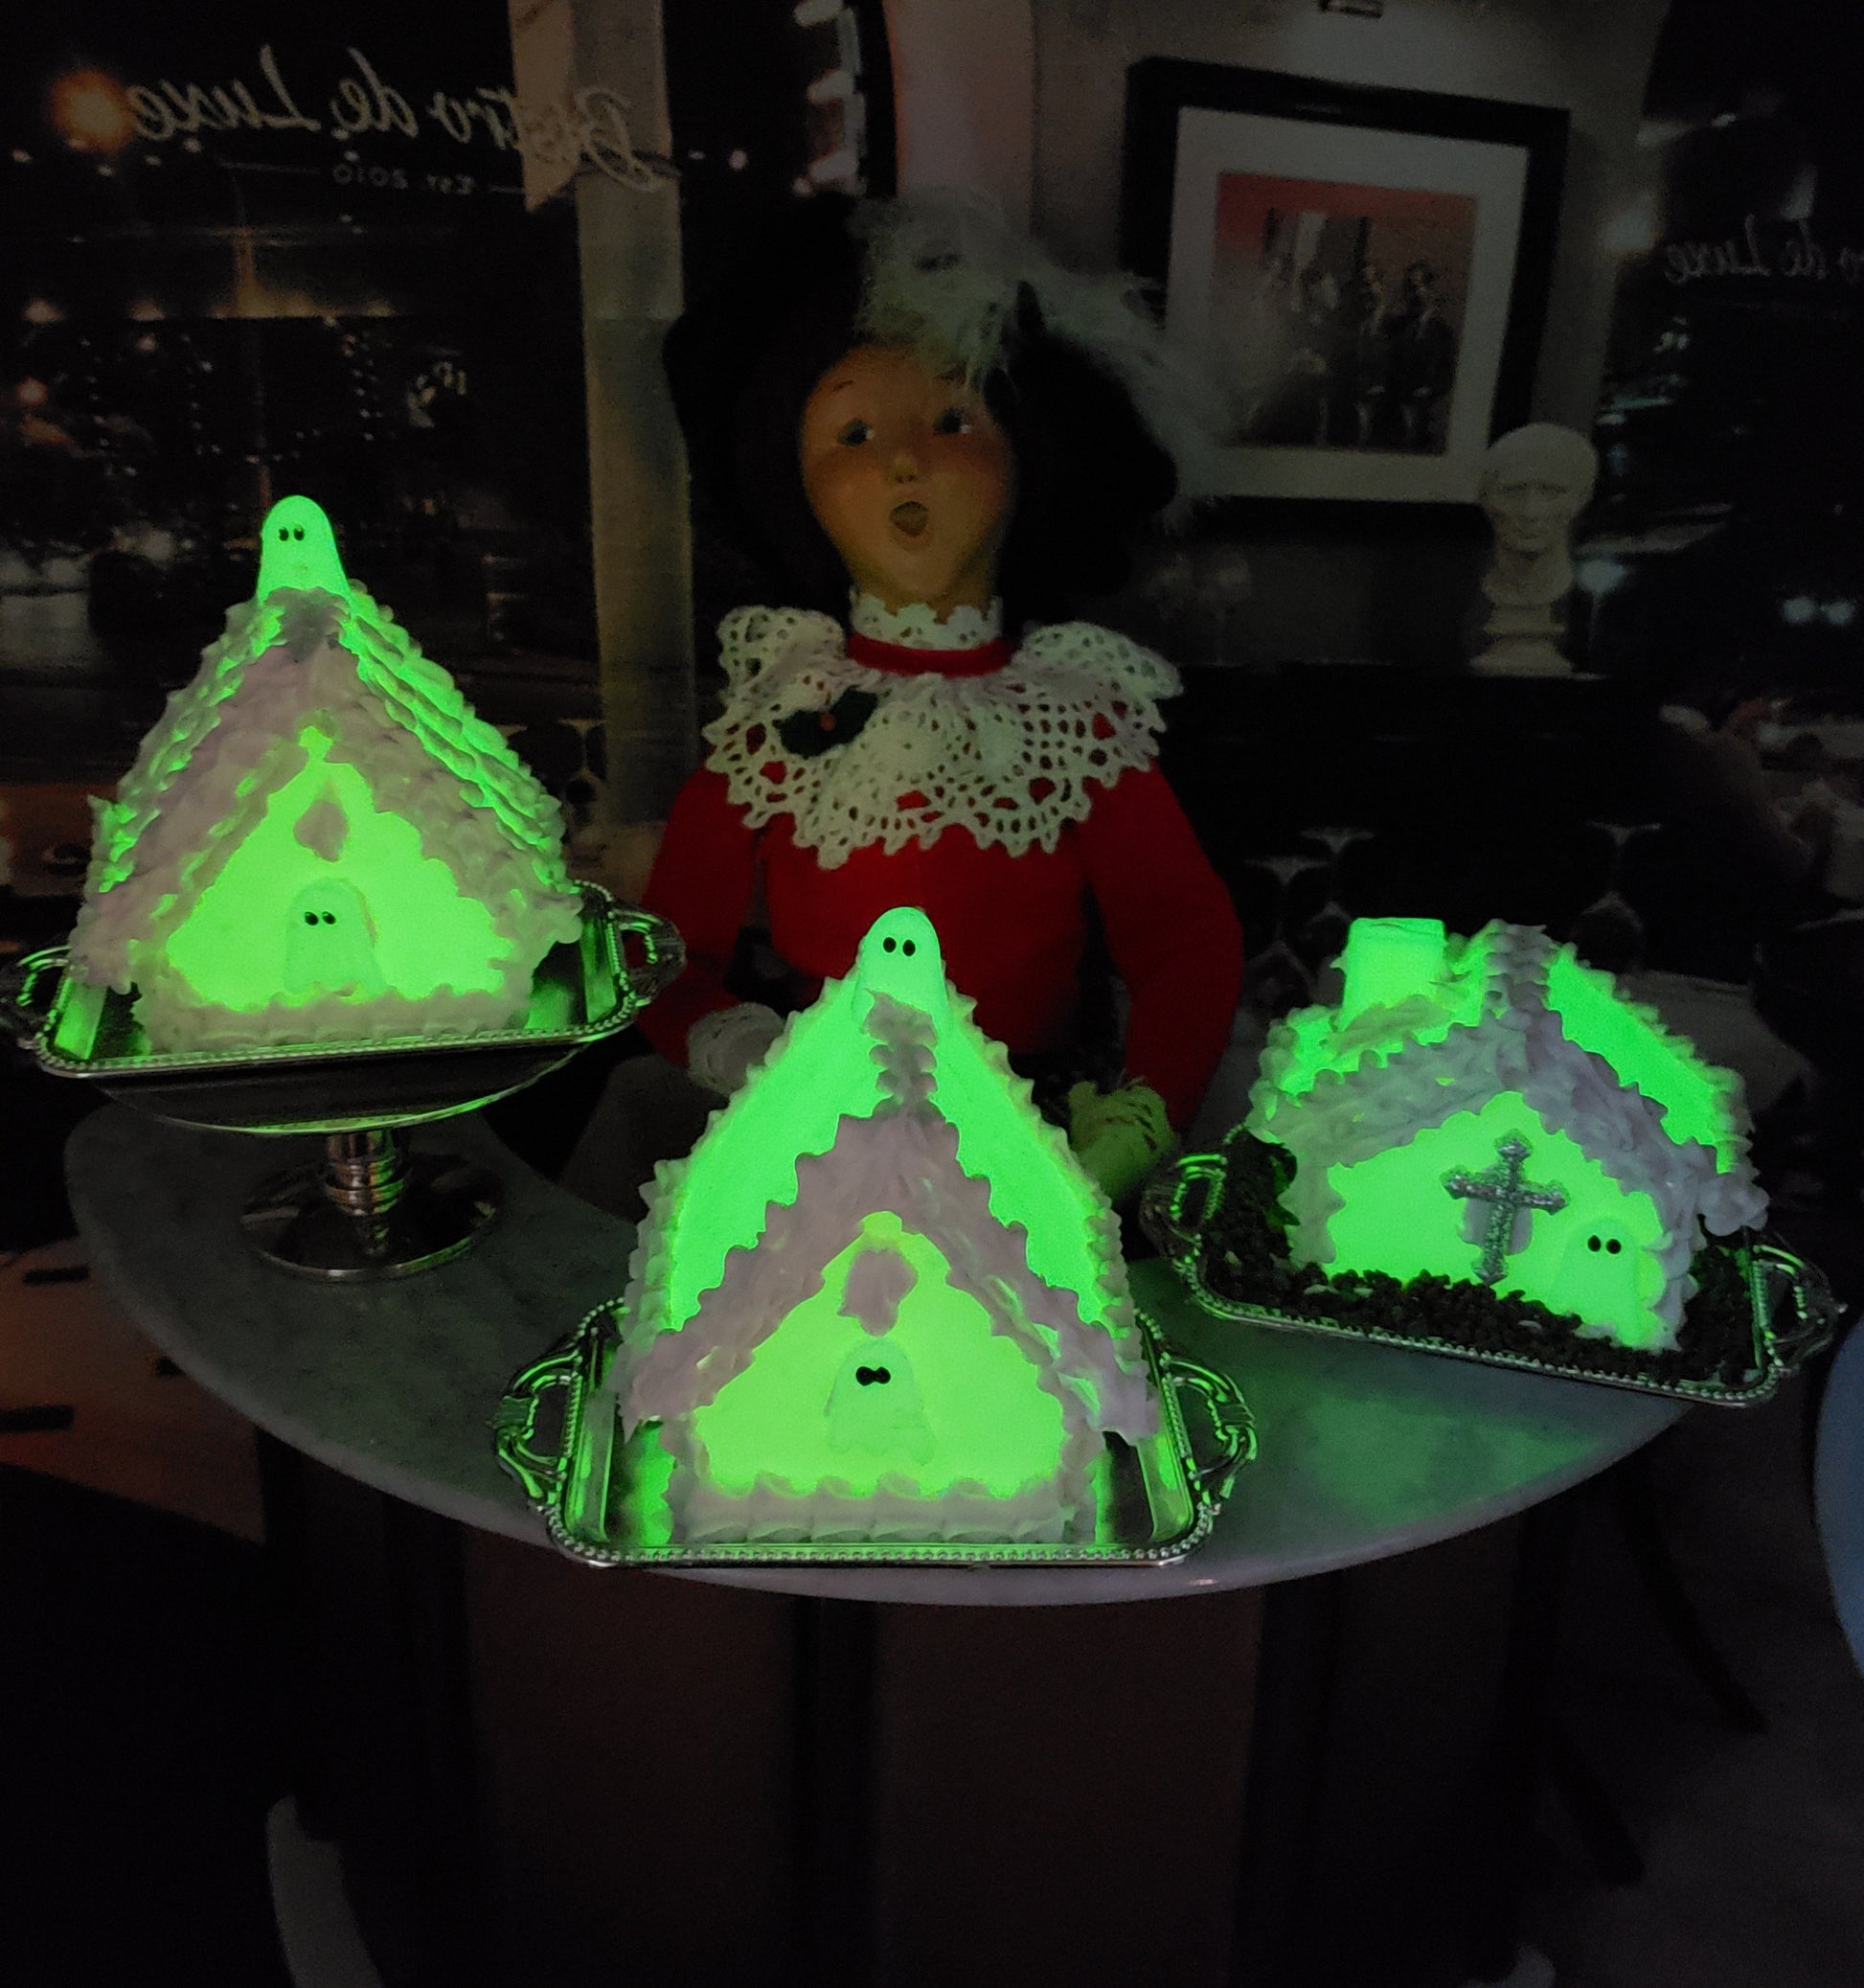 byer's choice doll with glow in the dark houses